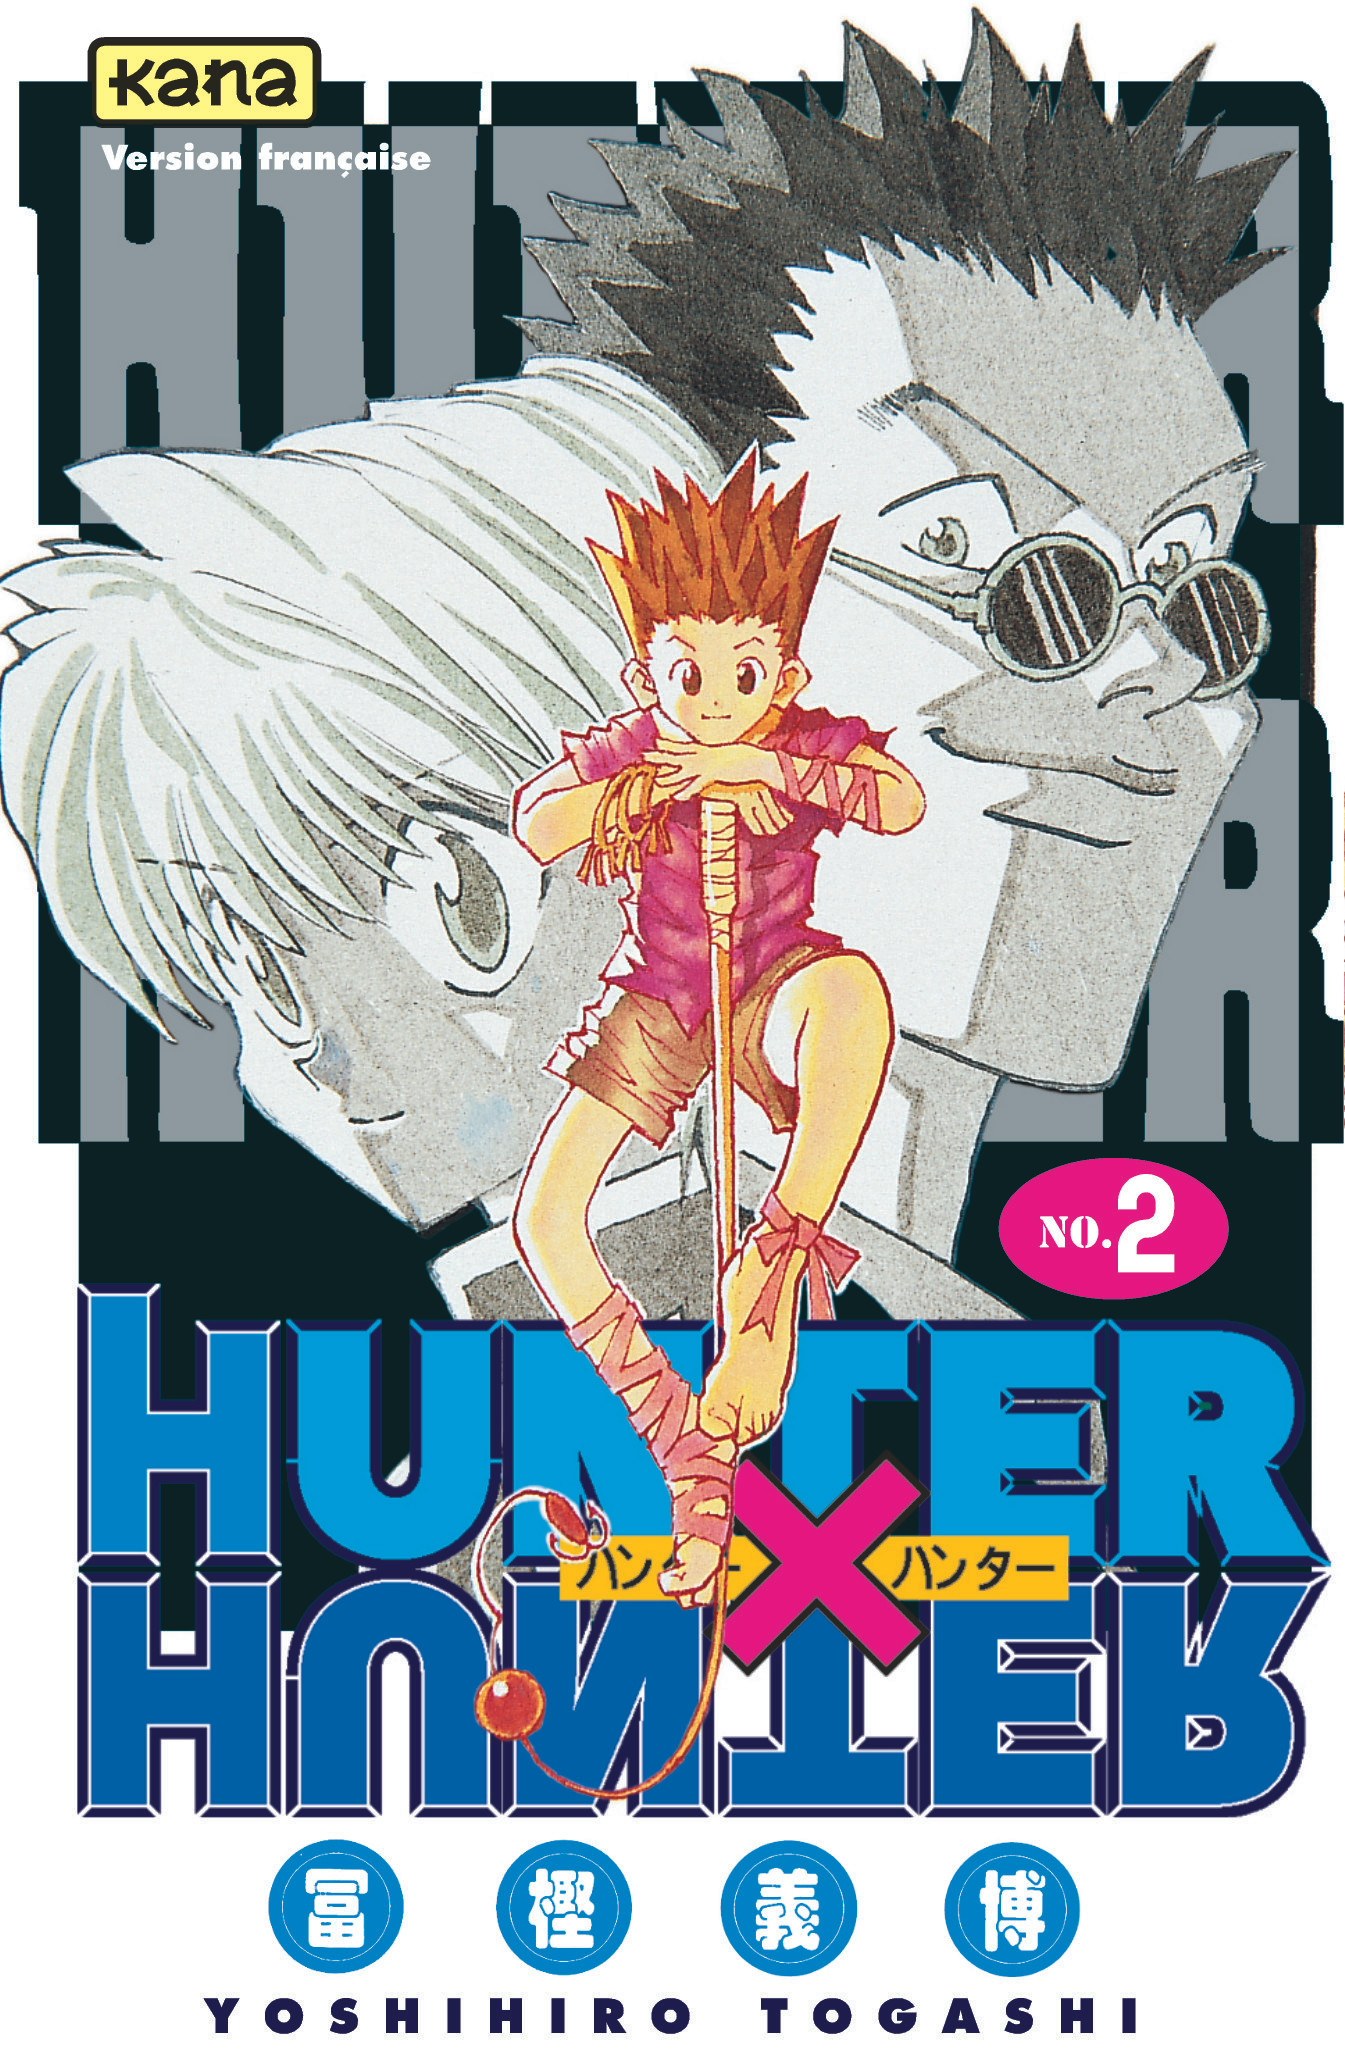 Couverture Tome 2 - HUNTER X HUNTER © POT (Yoshihiro Togashi) 1998-2018. All rights reserved.